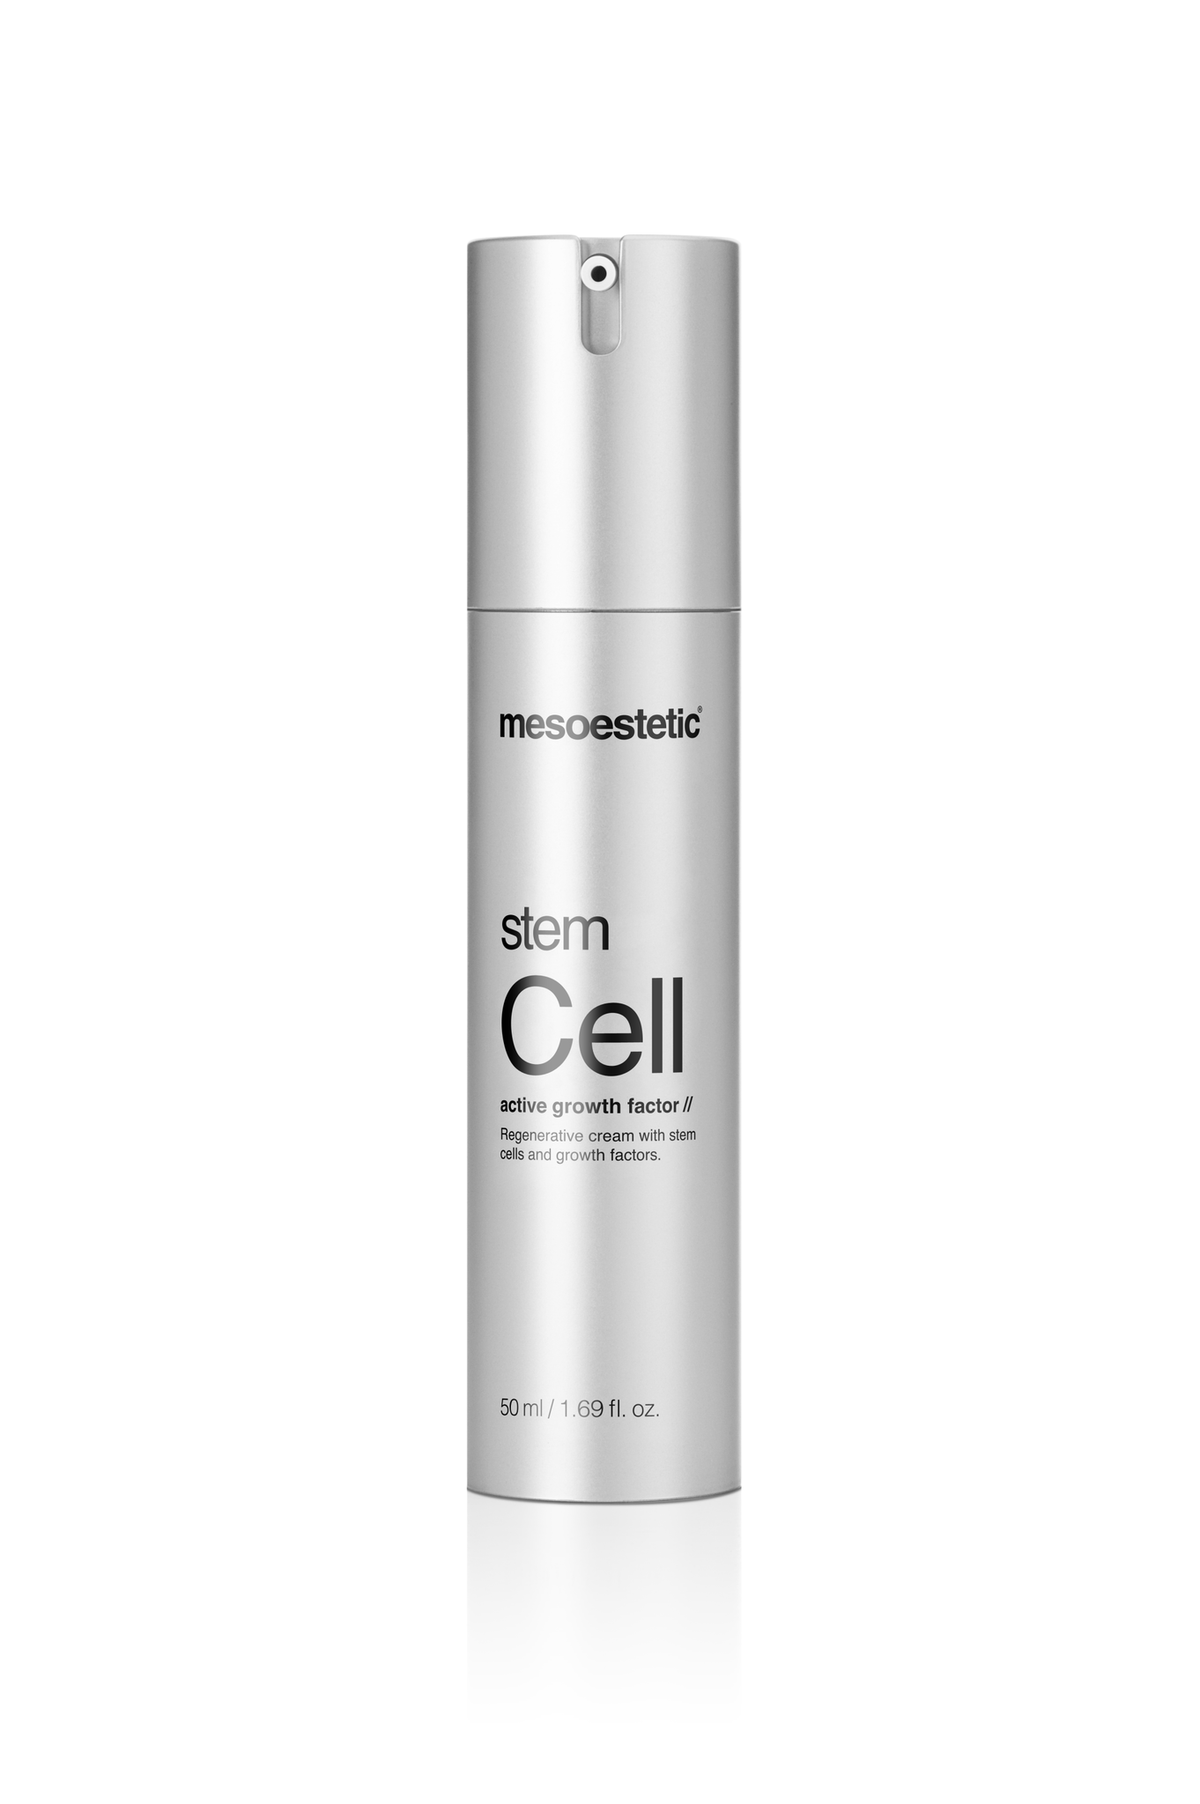 Mesoestetic Stem cell active growth factor